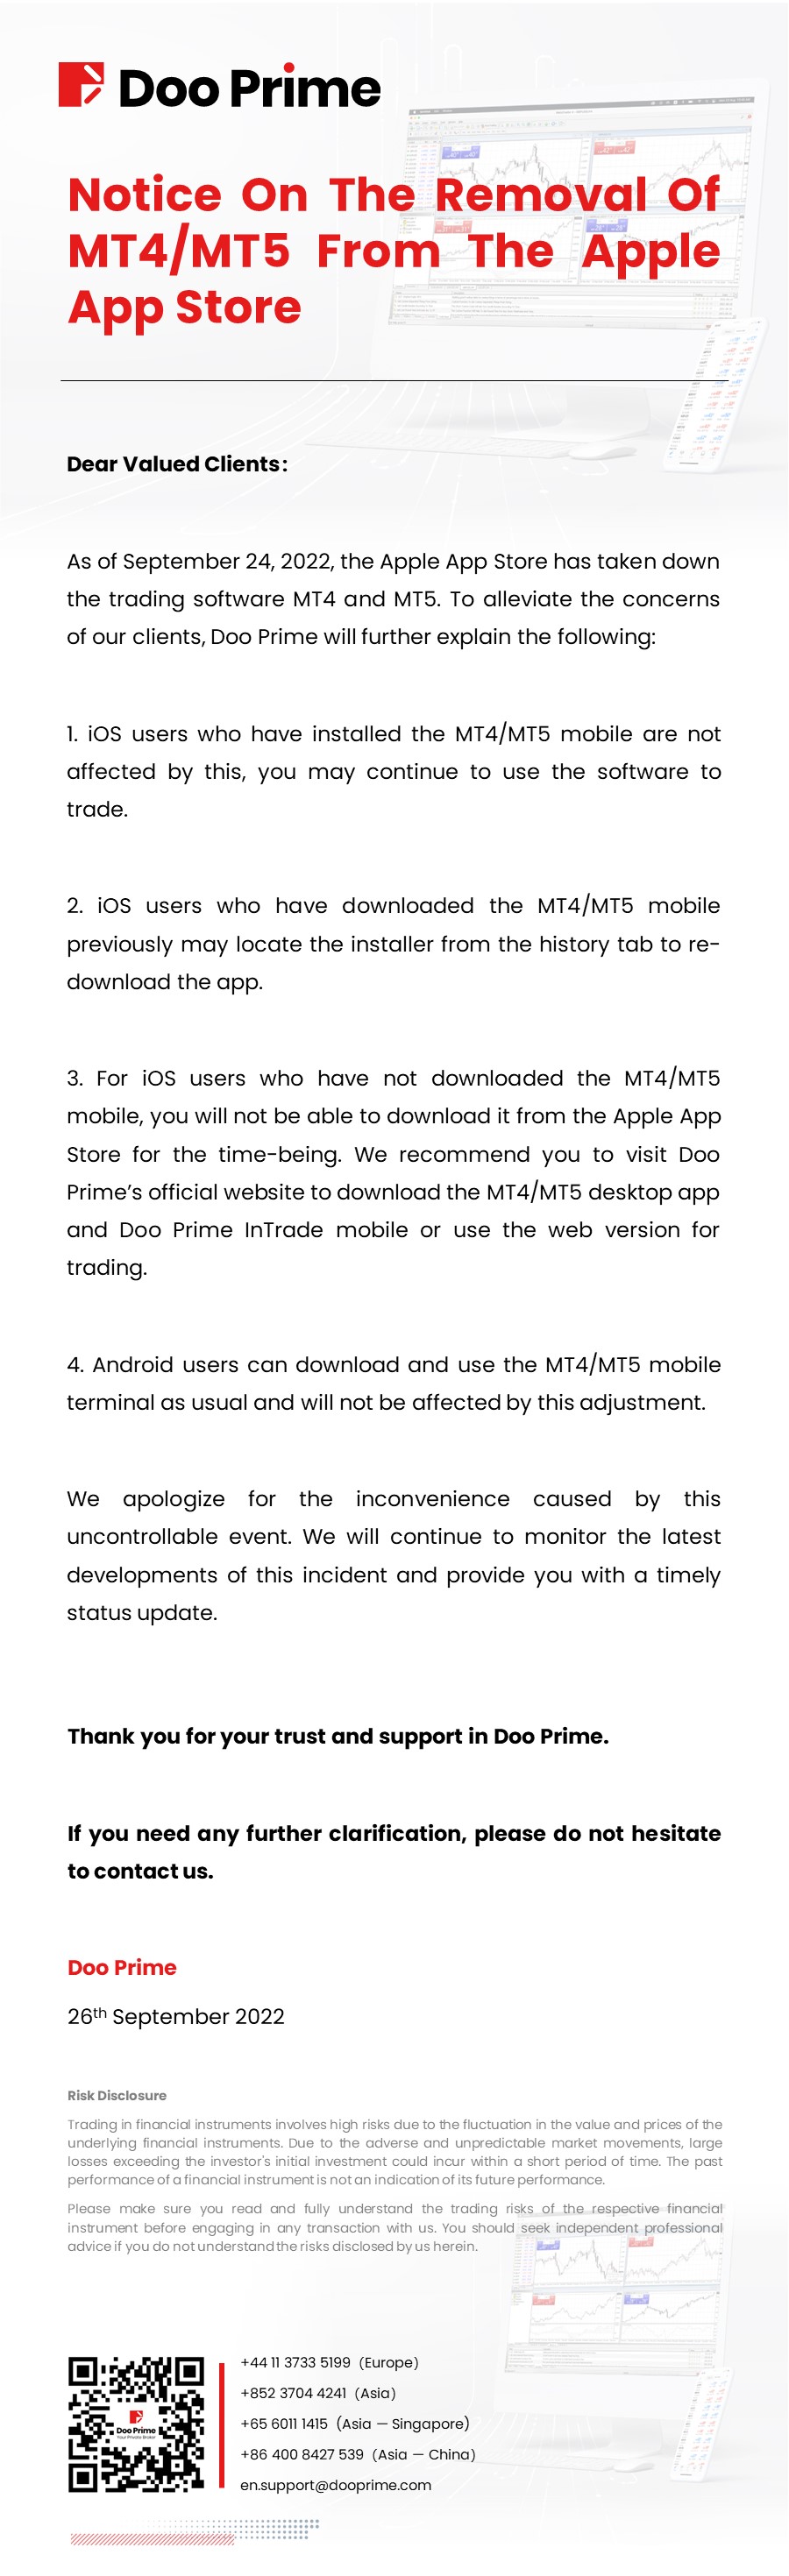 Notice On The Removal Of MT4/MT5 From The Apple App Store